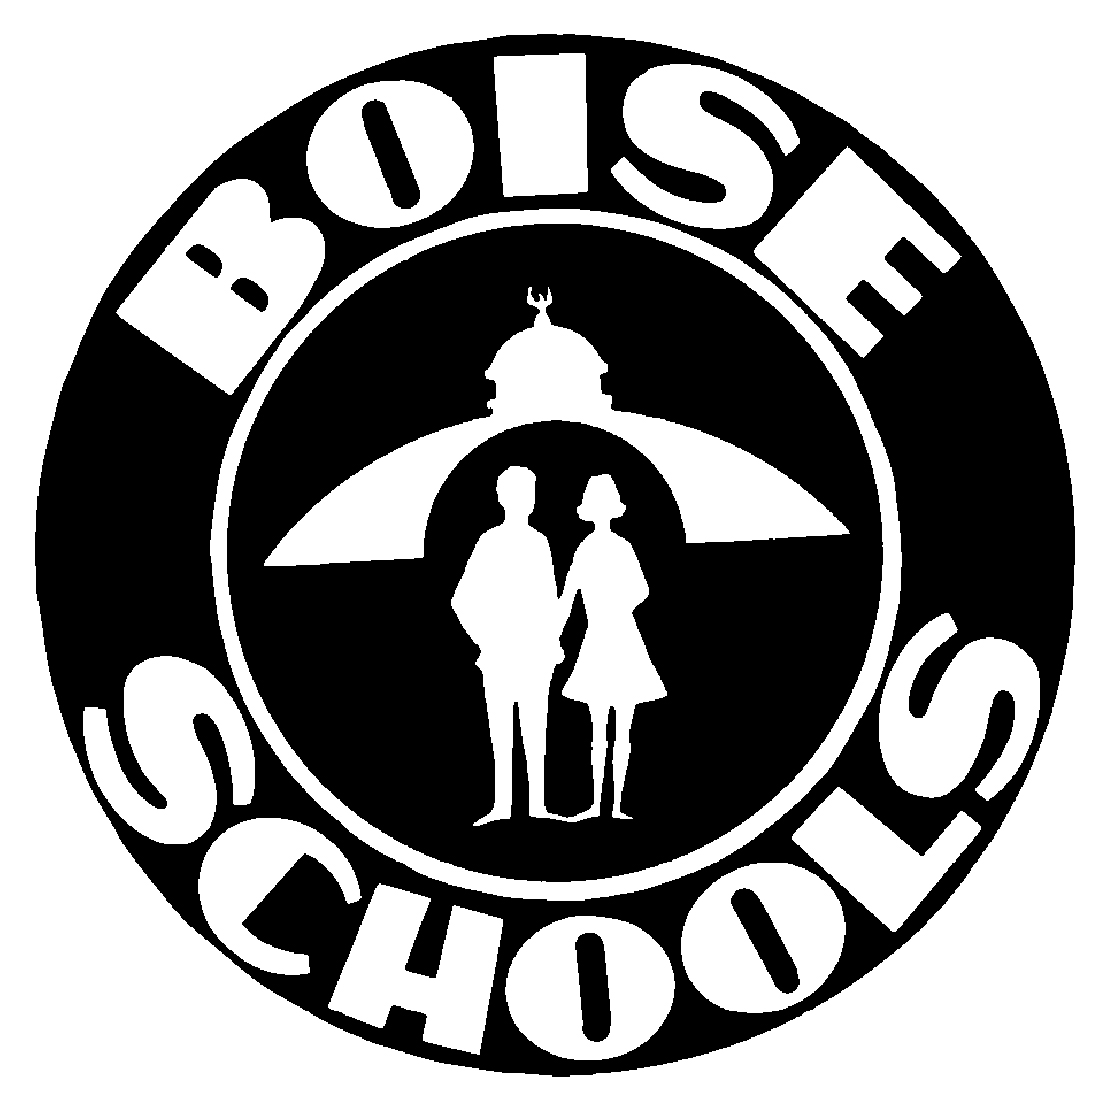 Boise Independent School District